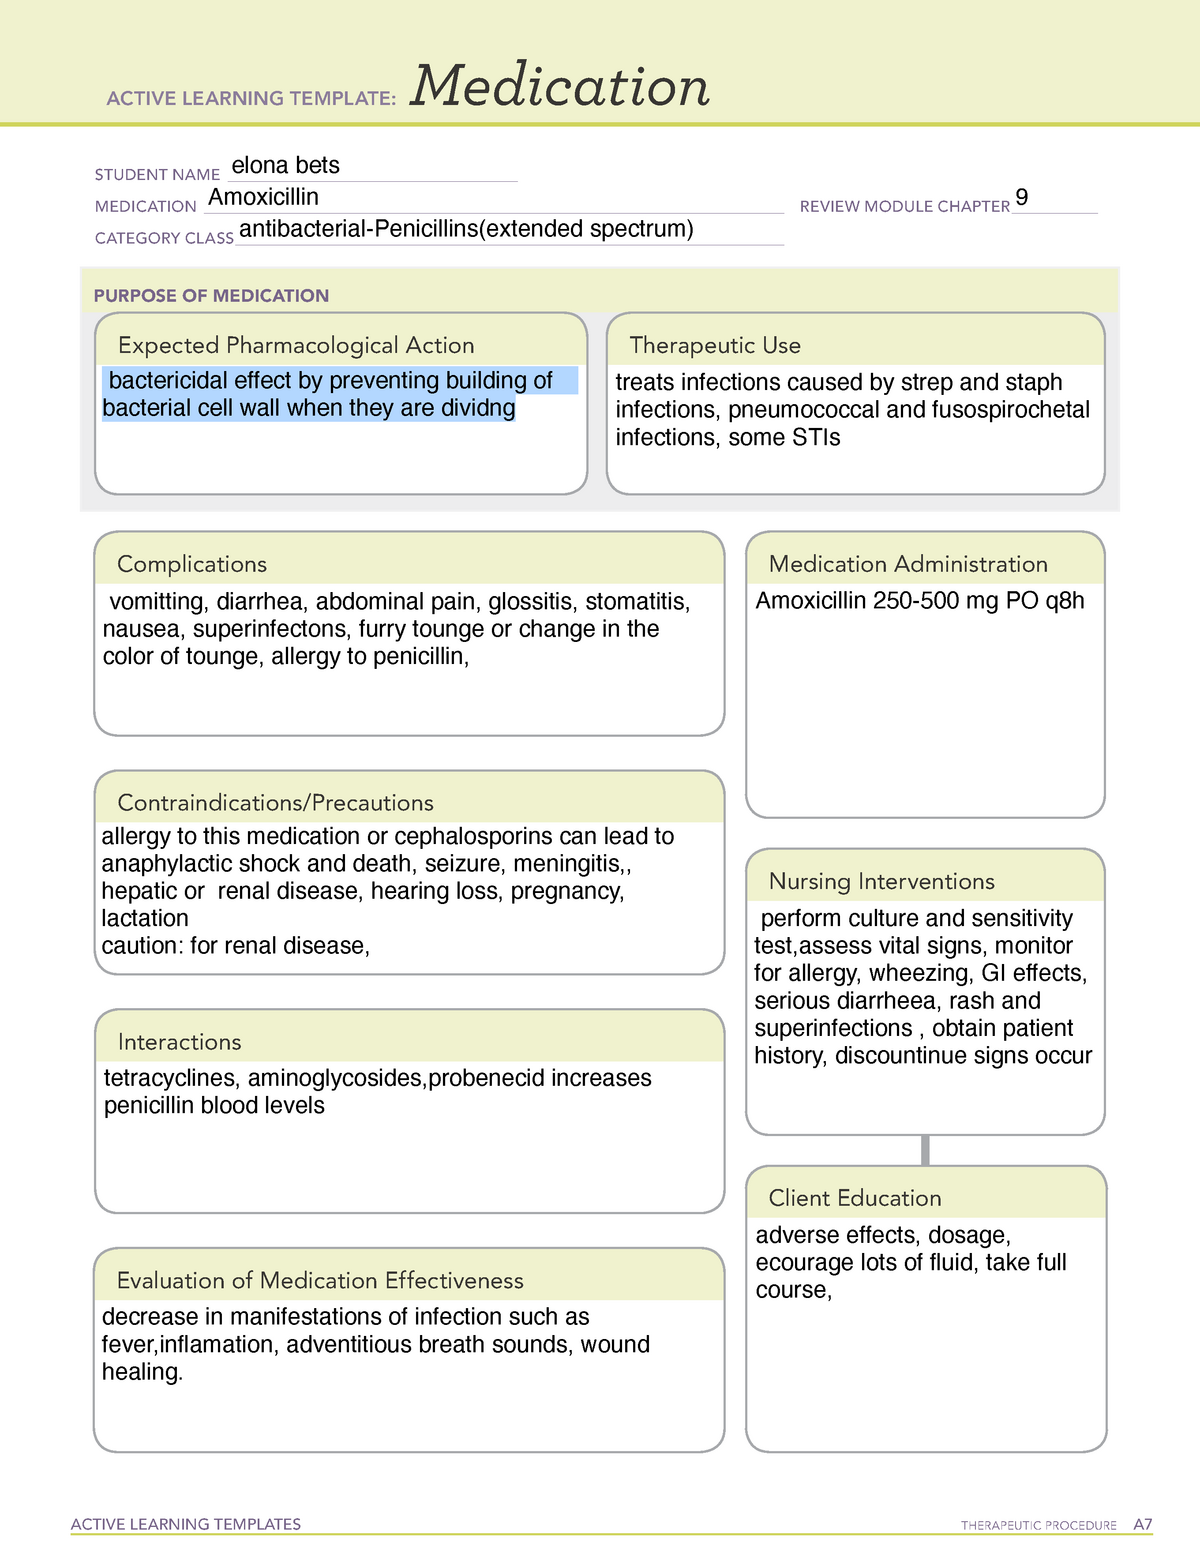 amoxicillin-pharmacology-graded-100-assignment-active-learning